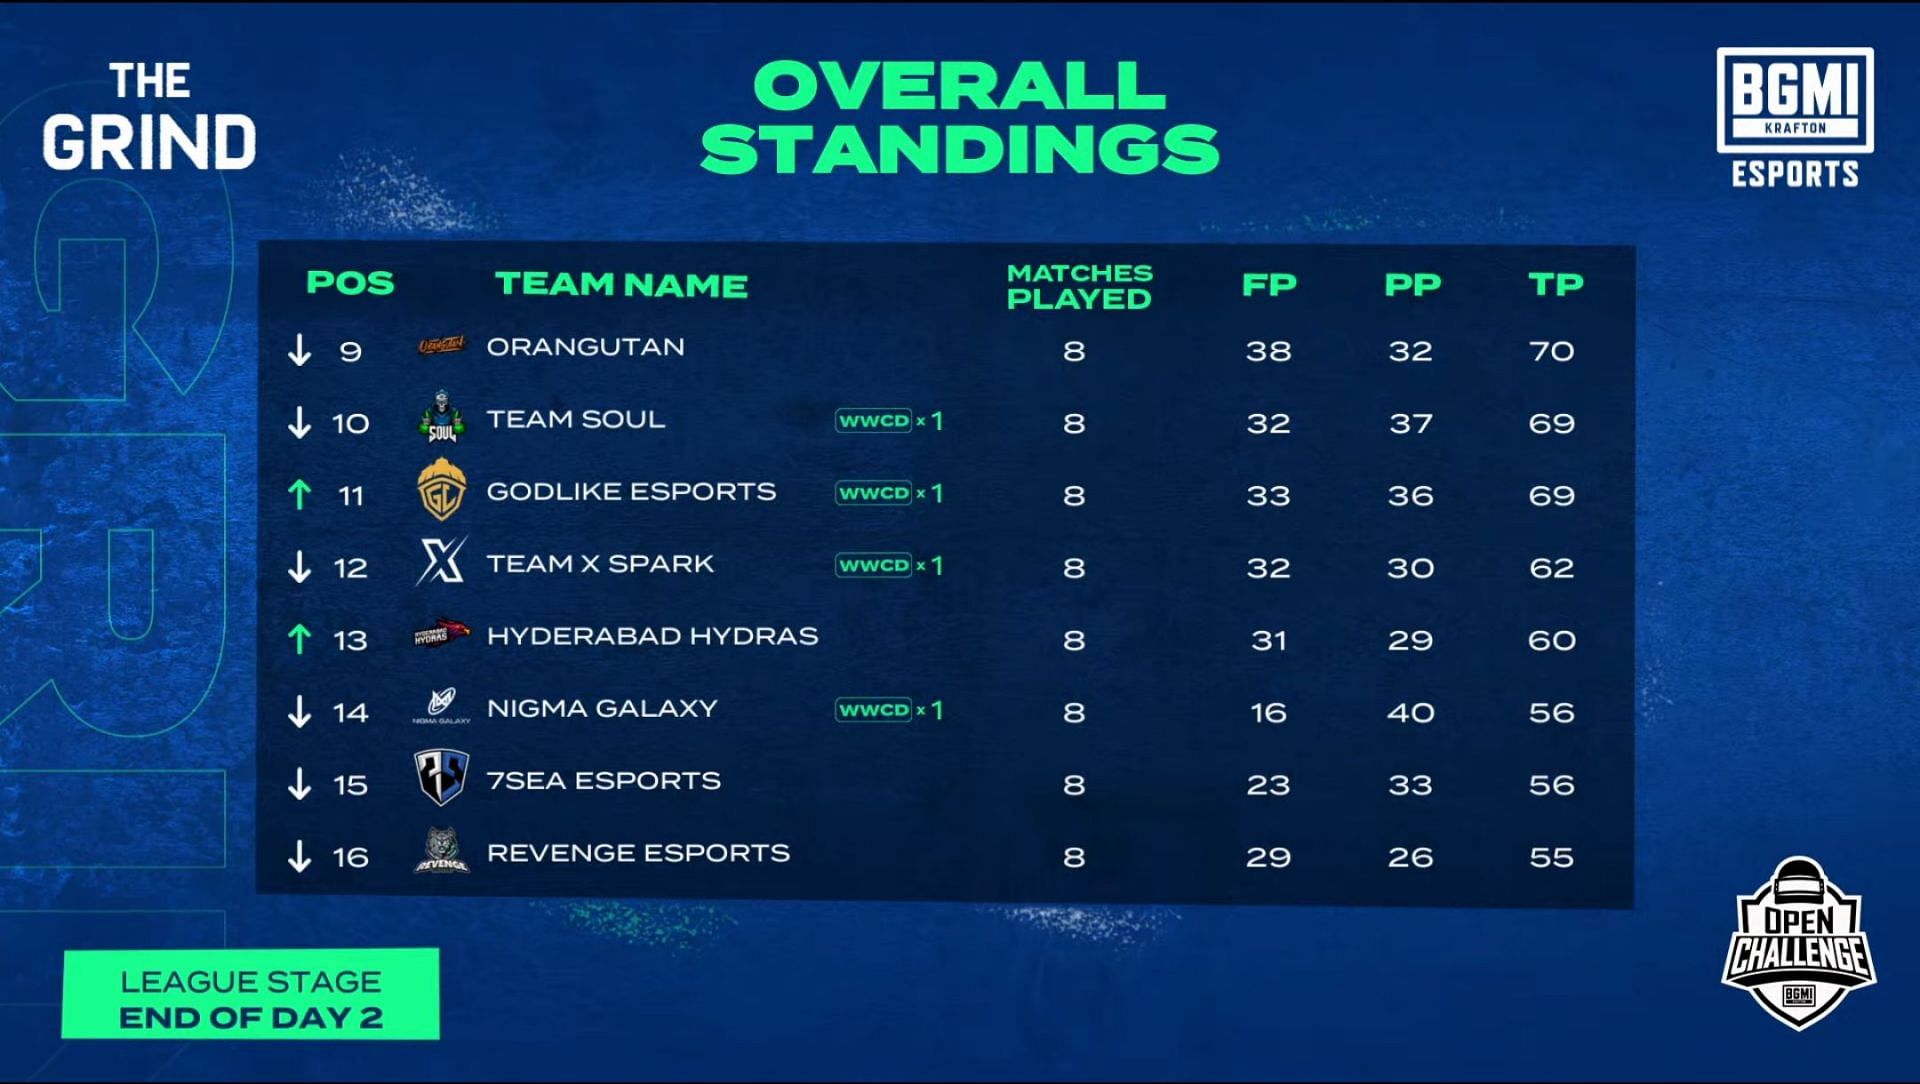 Team Xspark finished 12th after BMOC The Grind League day 2 (Image via BGMI)